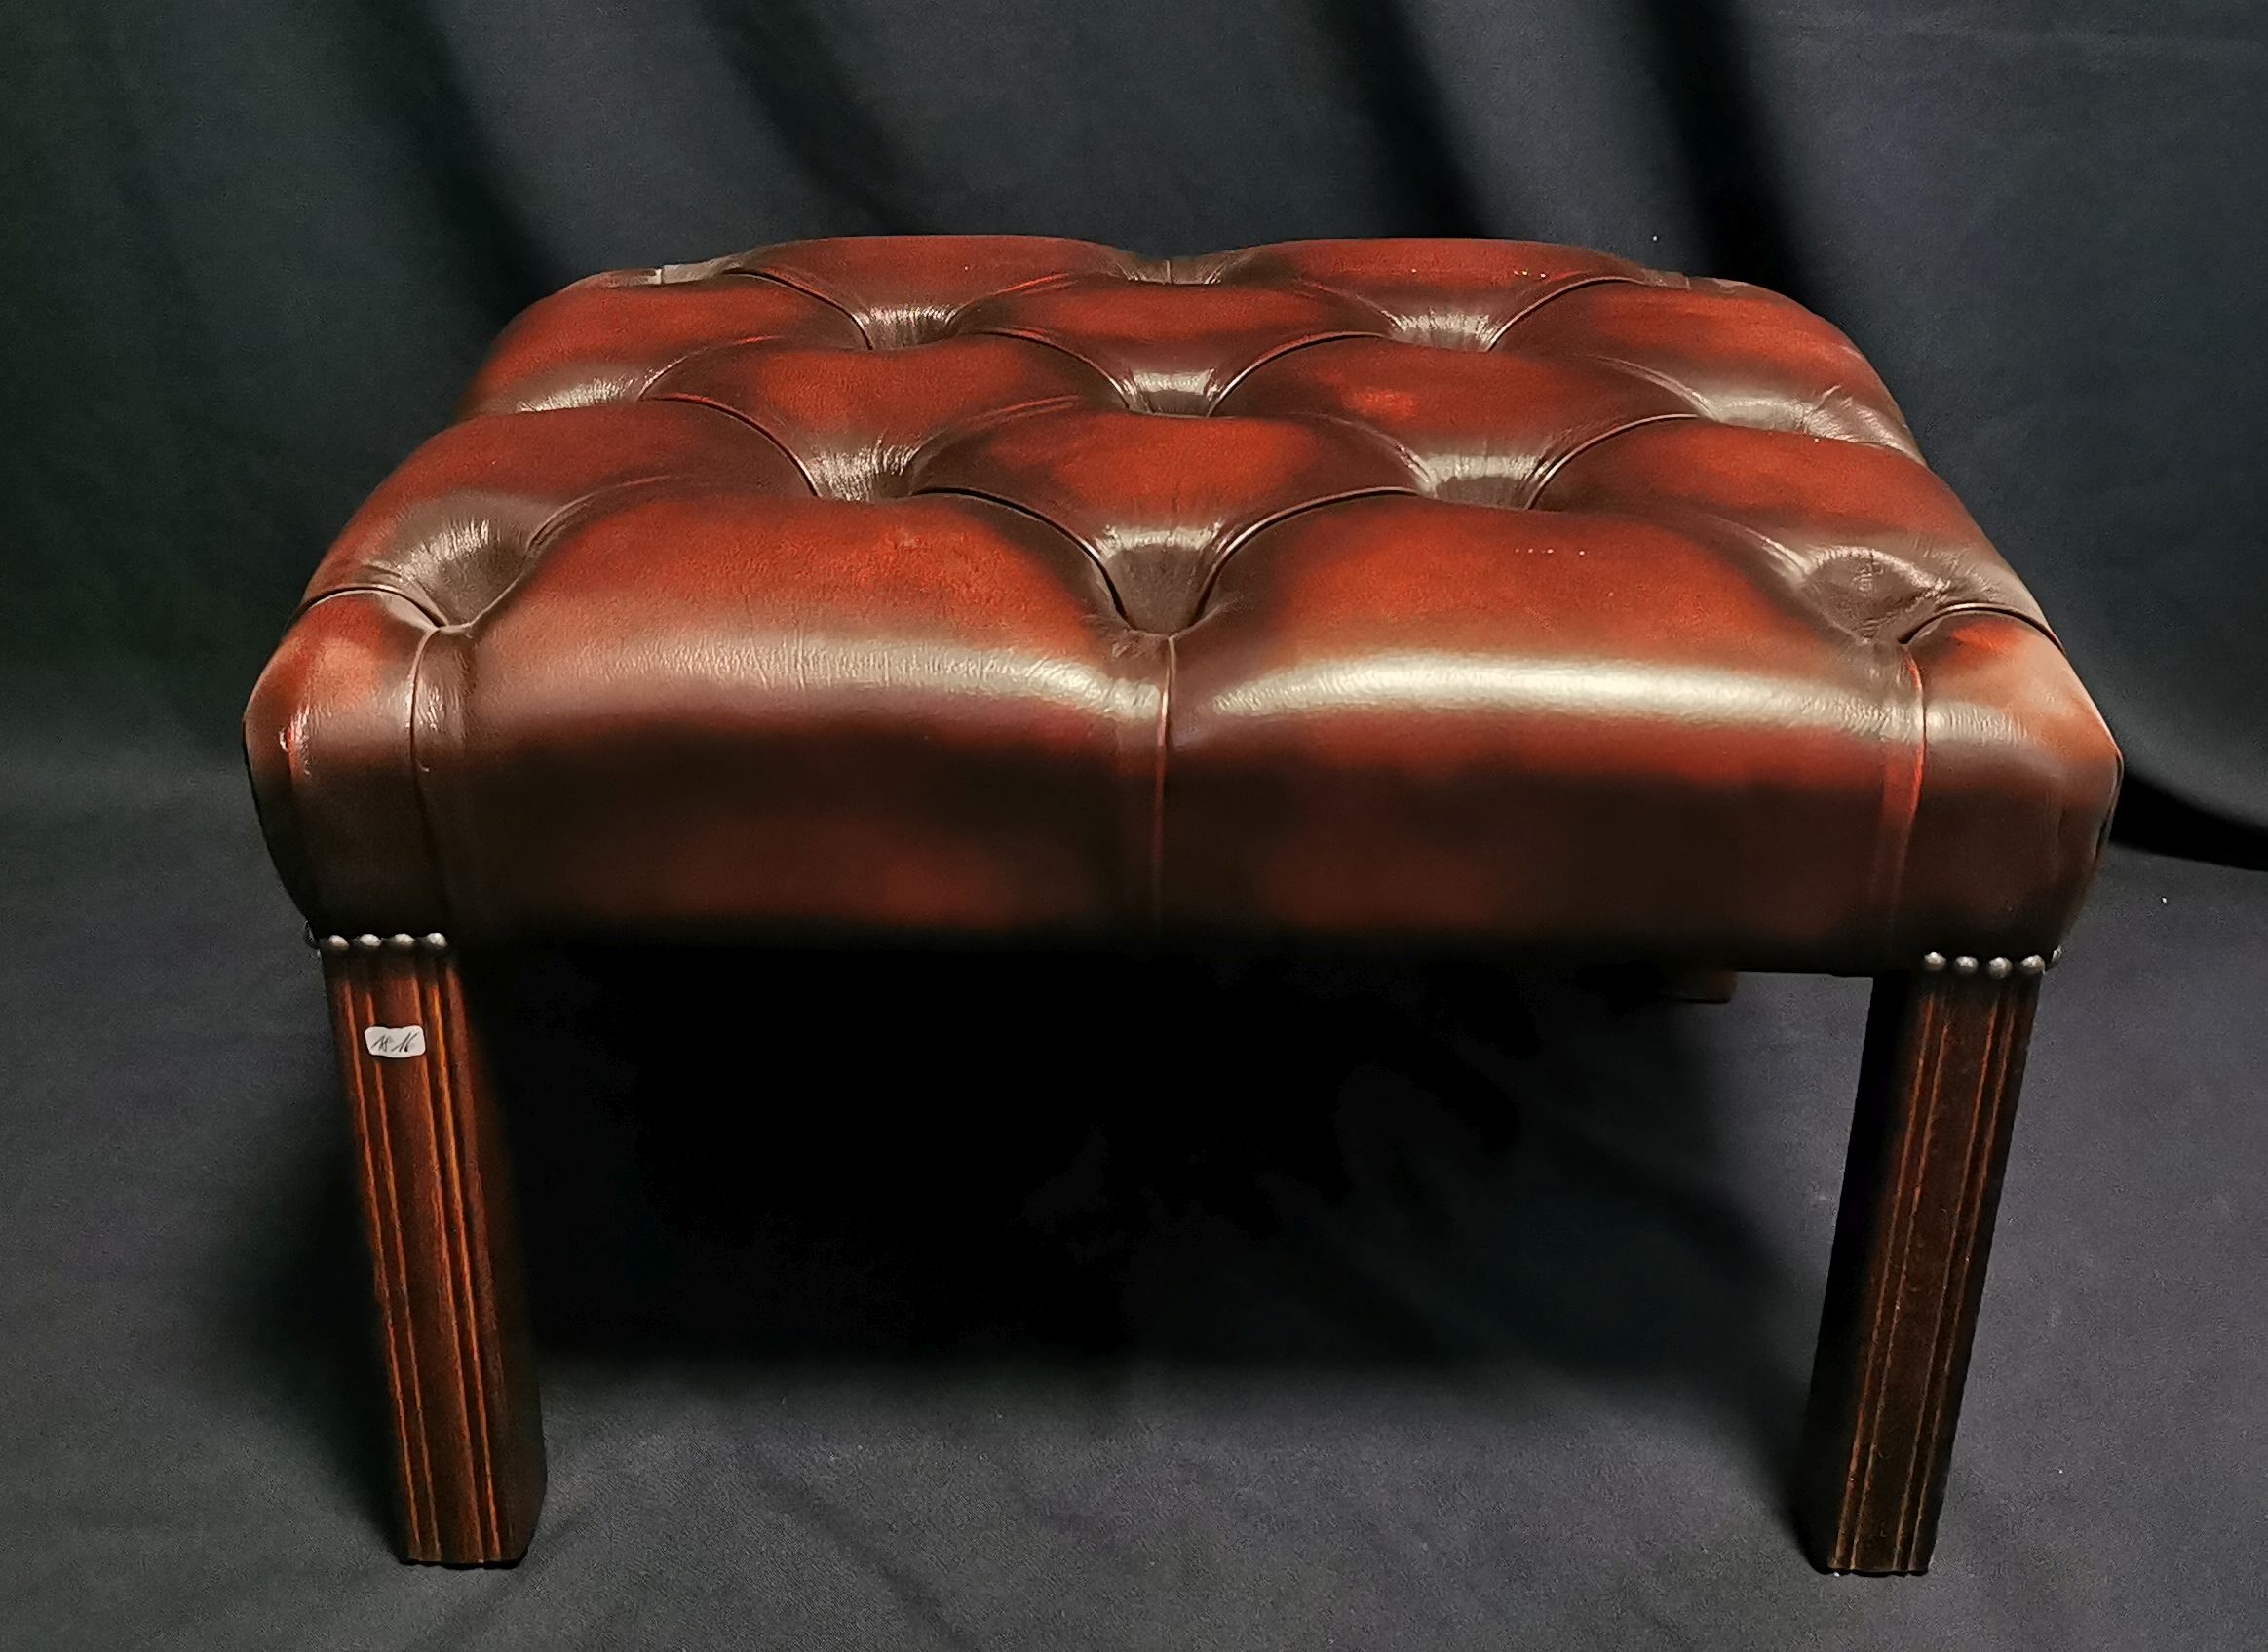 CHESTERFIELD FOOTSTOOL